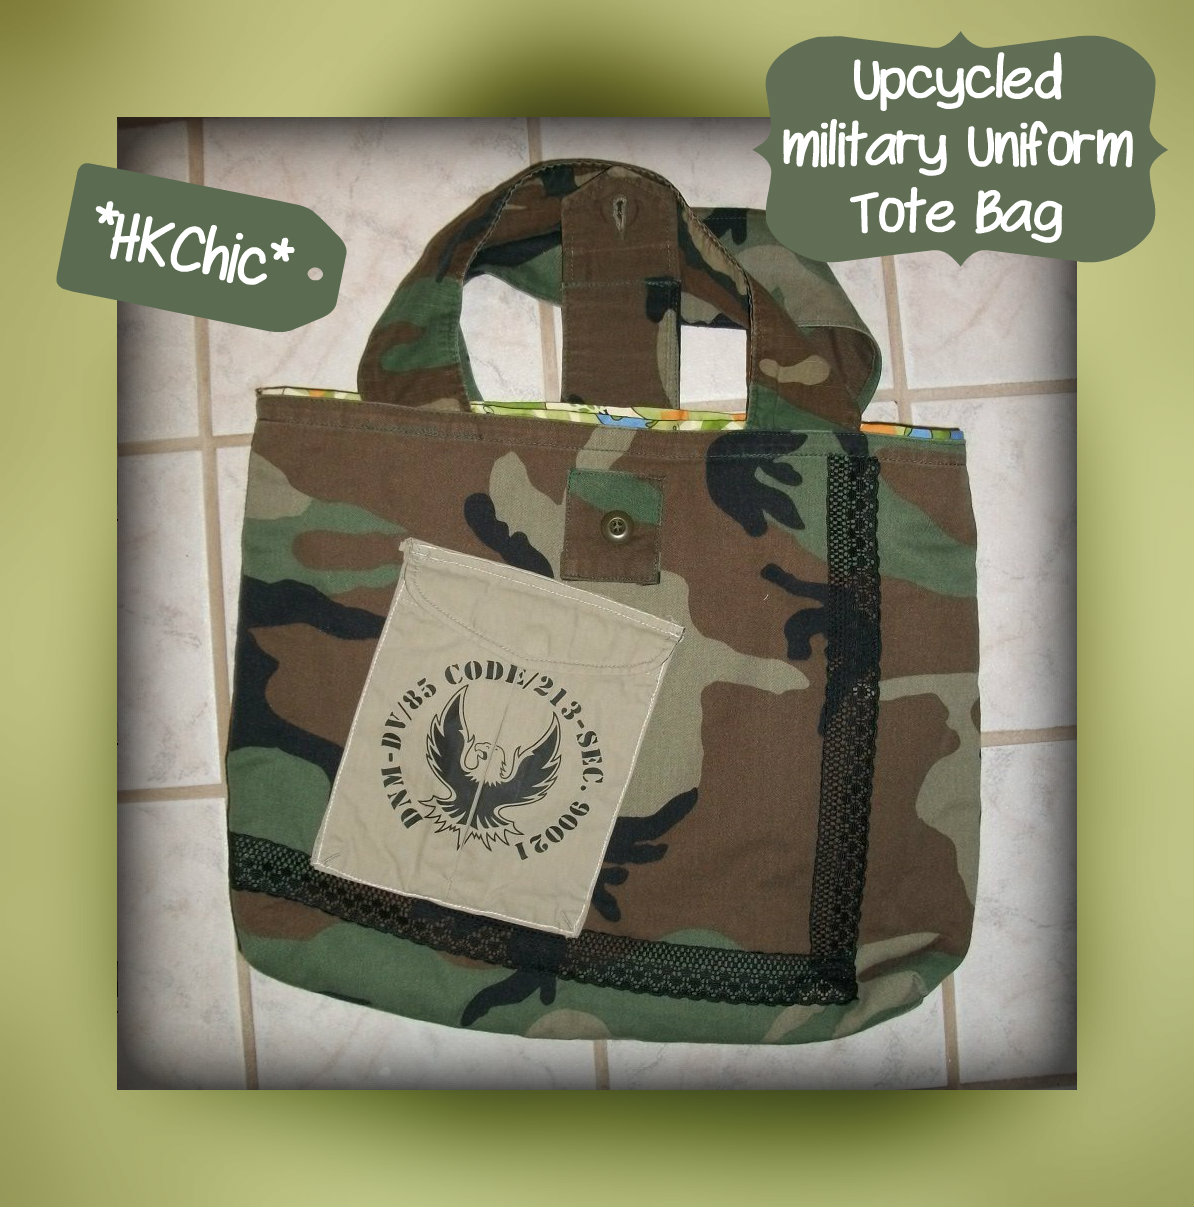 Upcycled Military Uniform Tote â€“ Sewing Projects | BurdaStyle